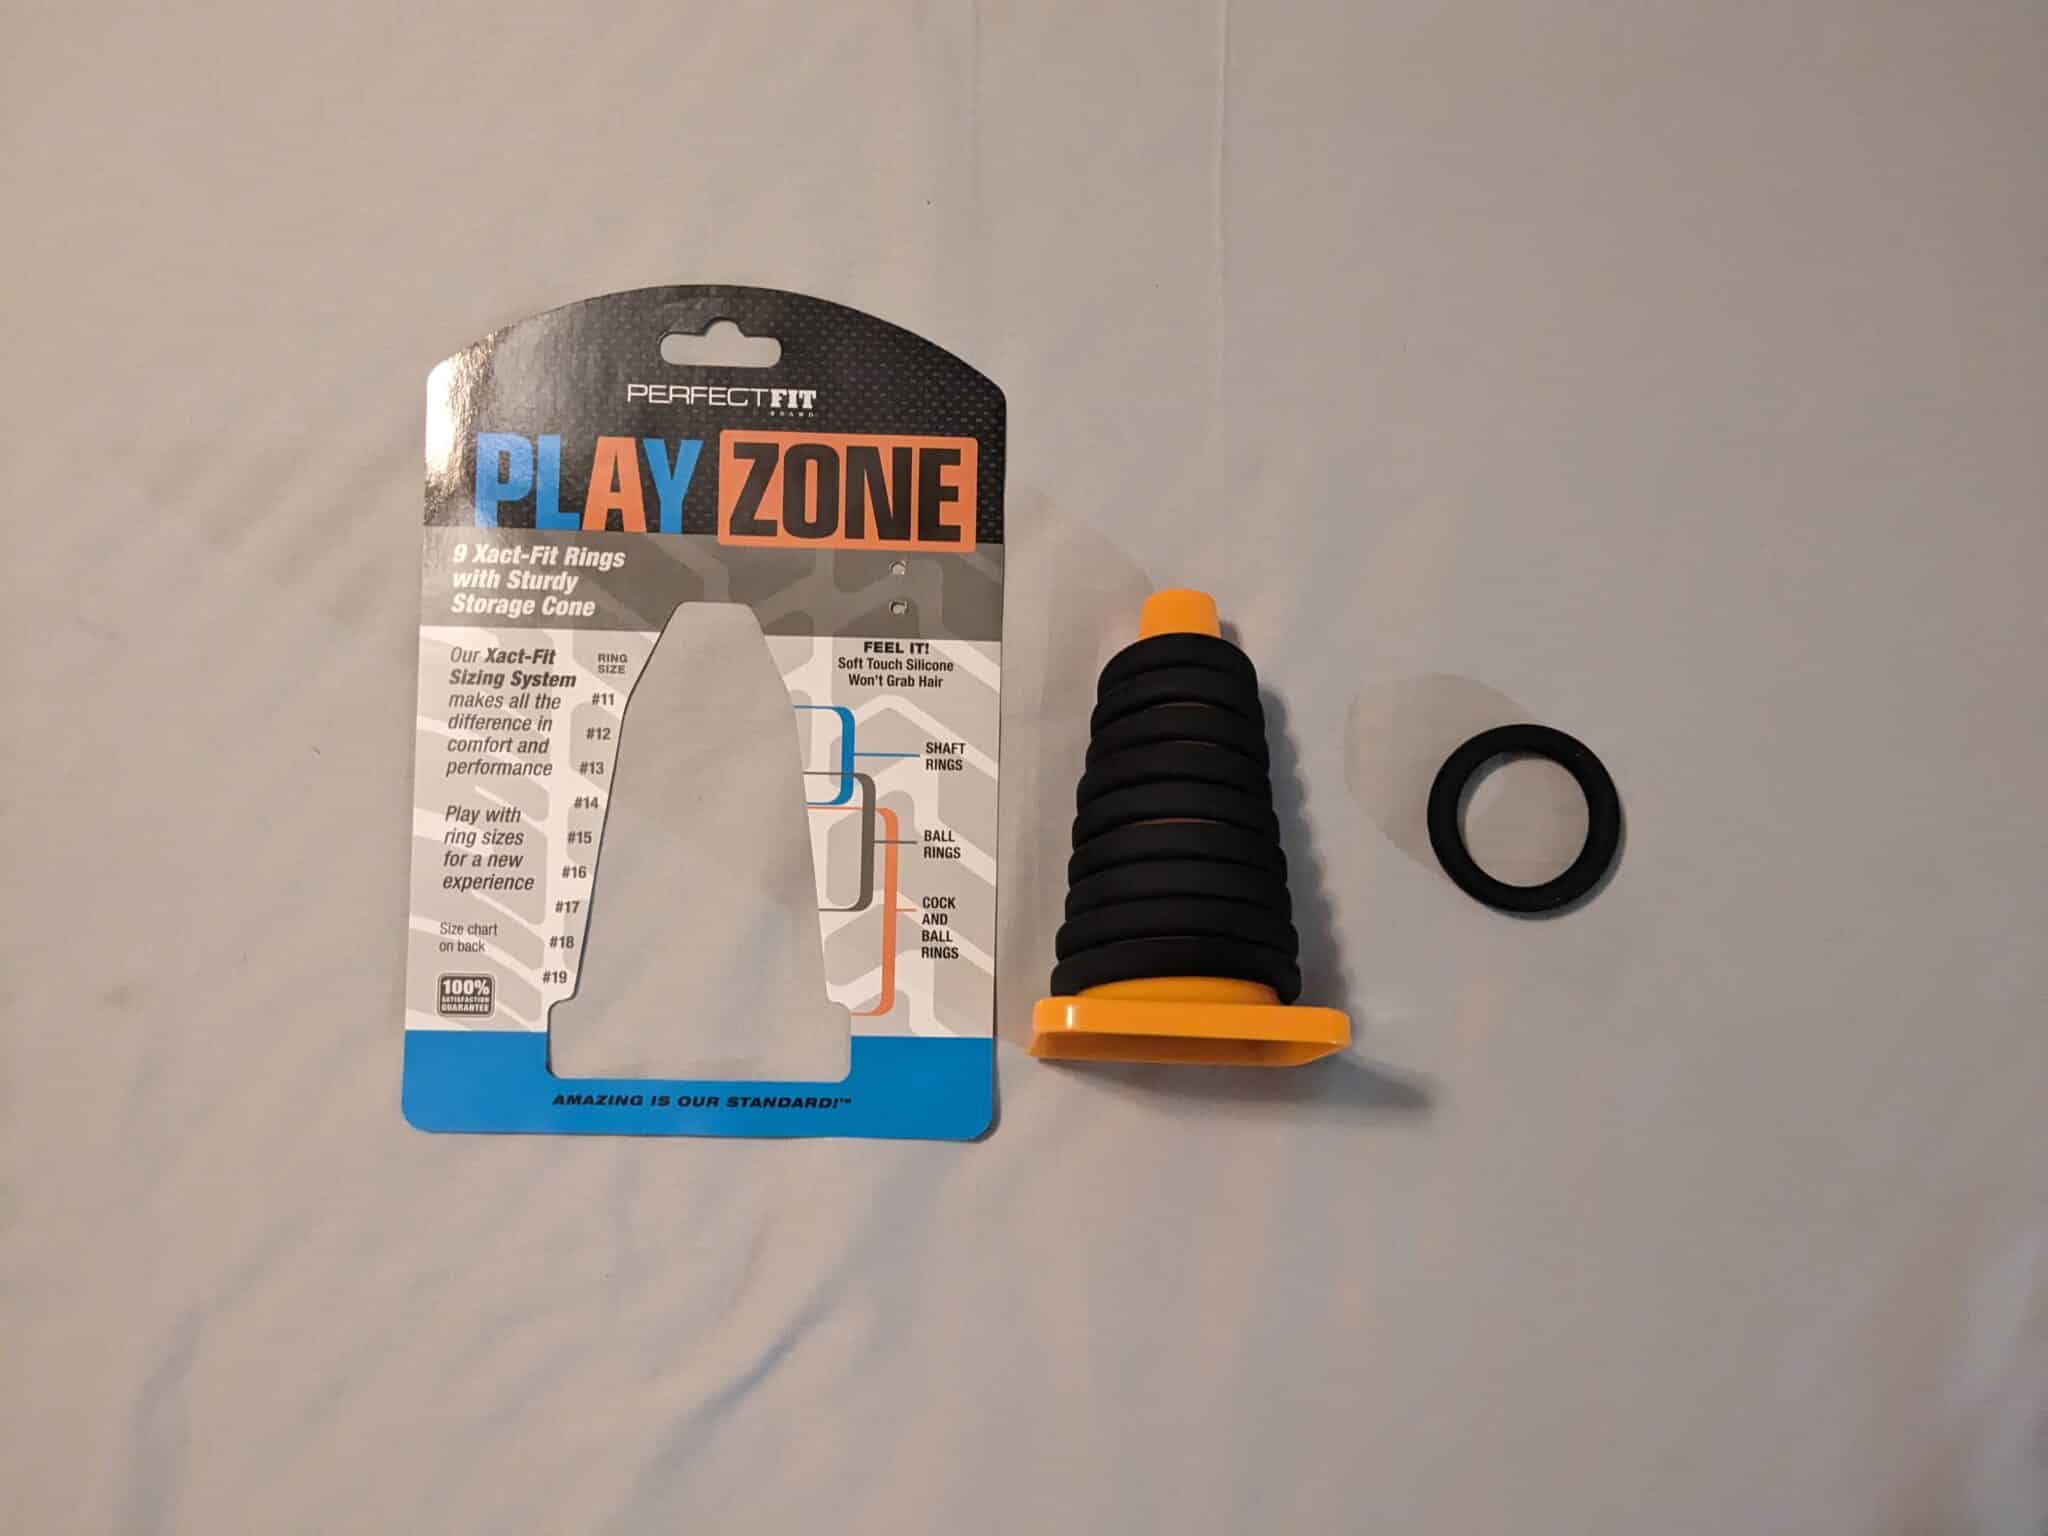 Perfect Fit Play Zone Cock Ring Set A Closer Look at The Price Tag